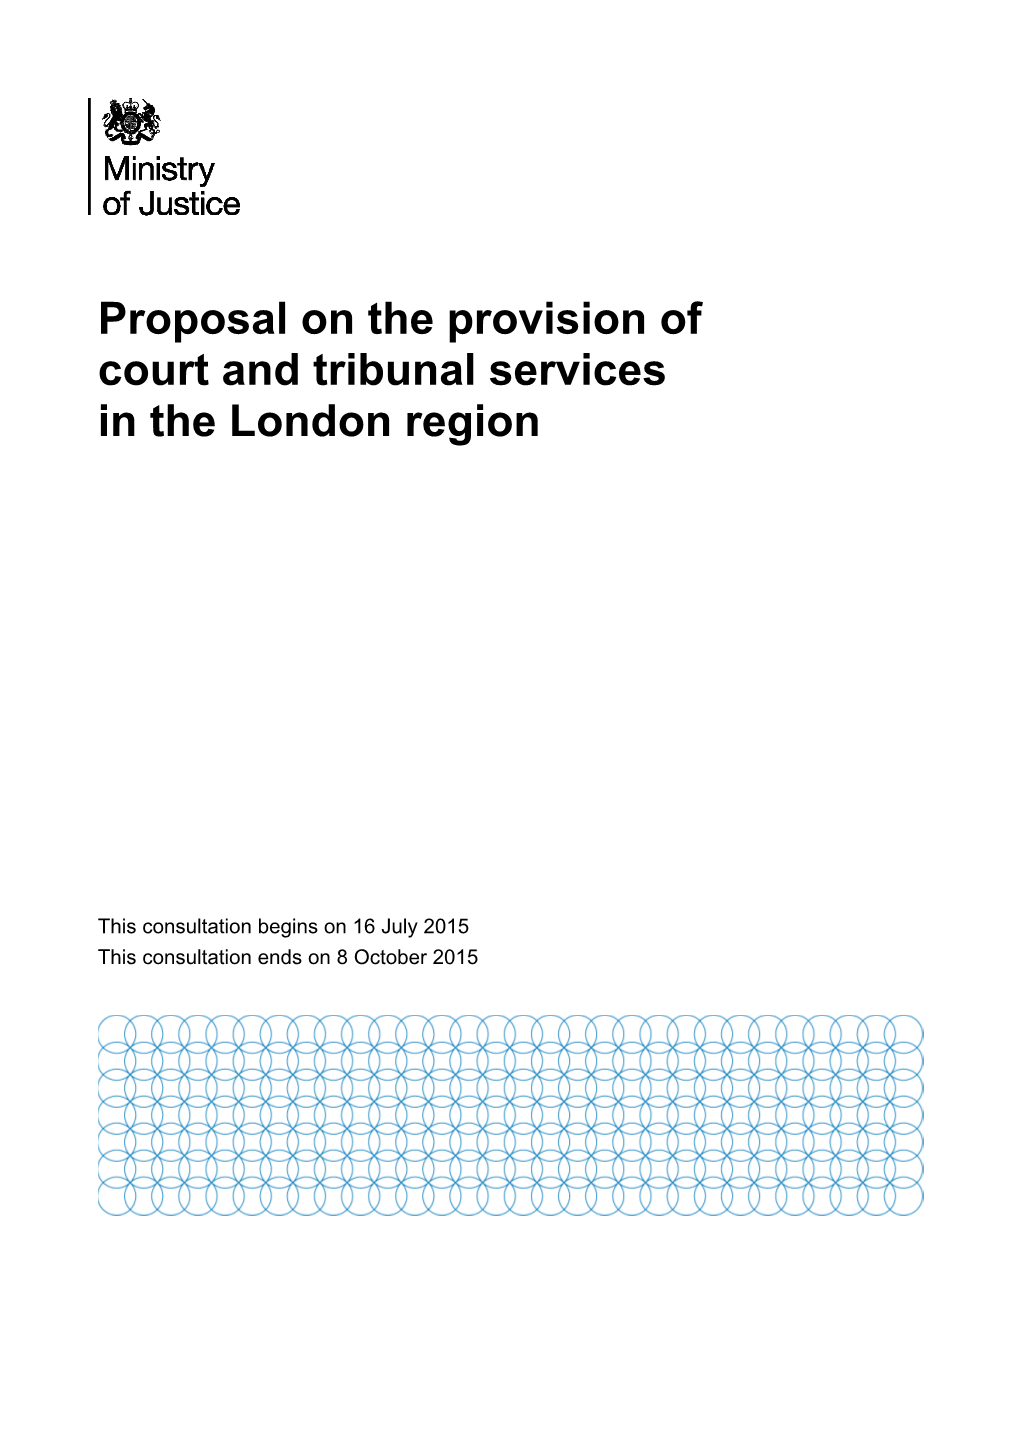 Proposal on the Provision of Court & Tribunal Services in London